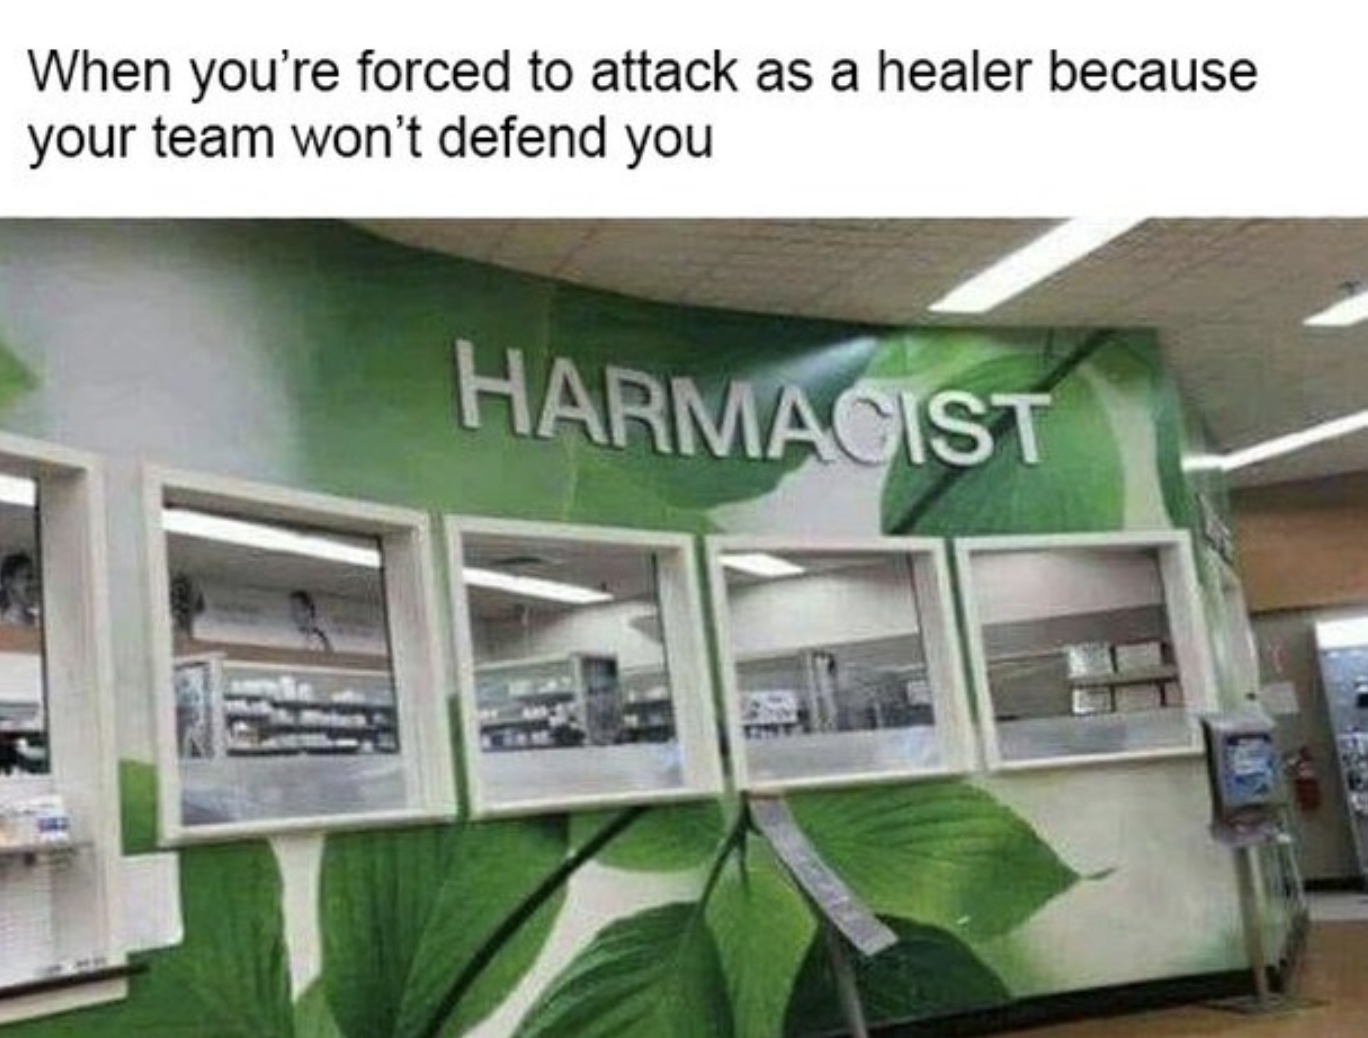 gaming memes - harmacist meme - When you're forced to attack as a healer because your team won't defend you Harmacist